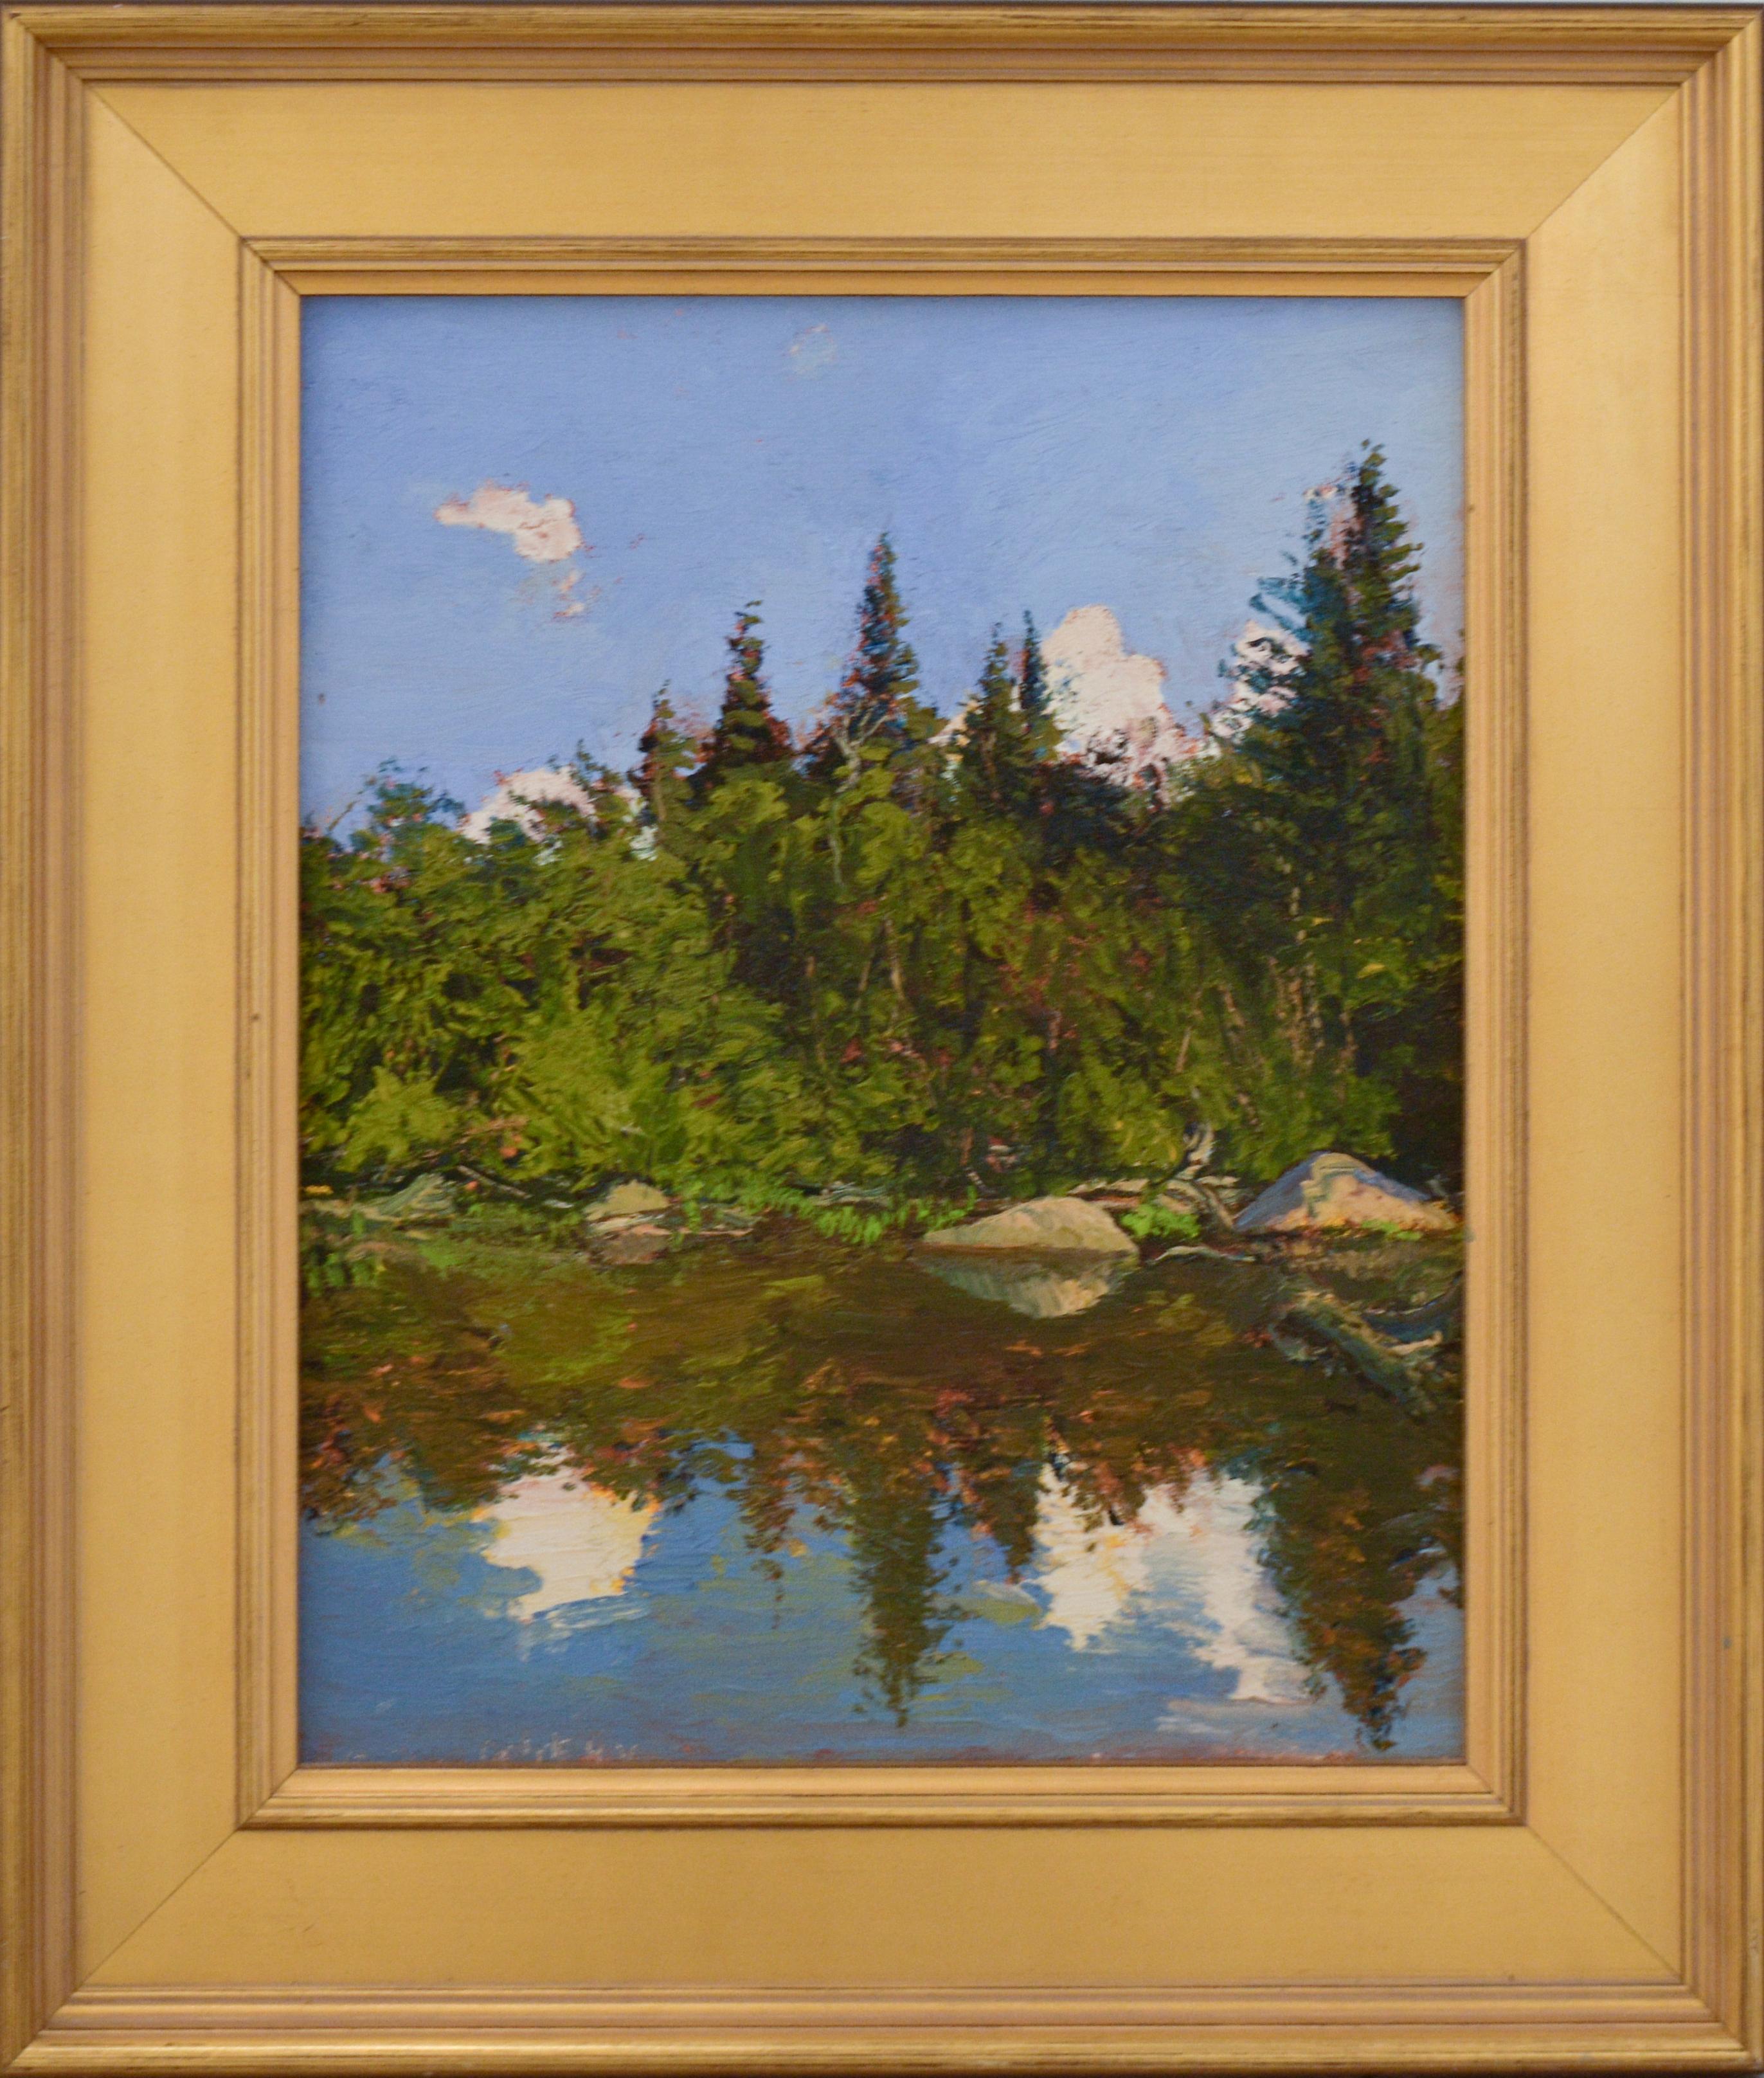 Impressionist en plein-air landscape painting on linen of an evergreen pine forest on water against a bright blue sky
"Bear Cove," an upstate New York landscape, painted plein-air by Harry Orlyk
oil on linen, ready to hang as is 
16.75 x 13 inches